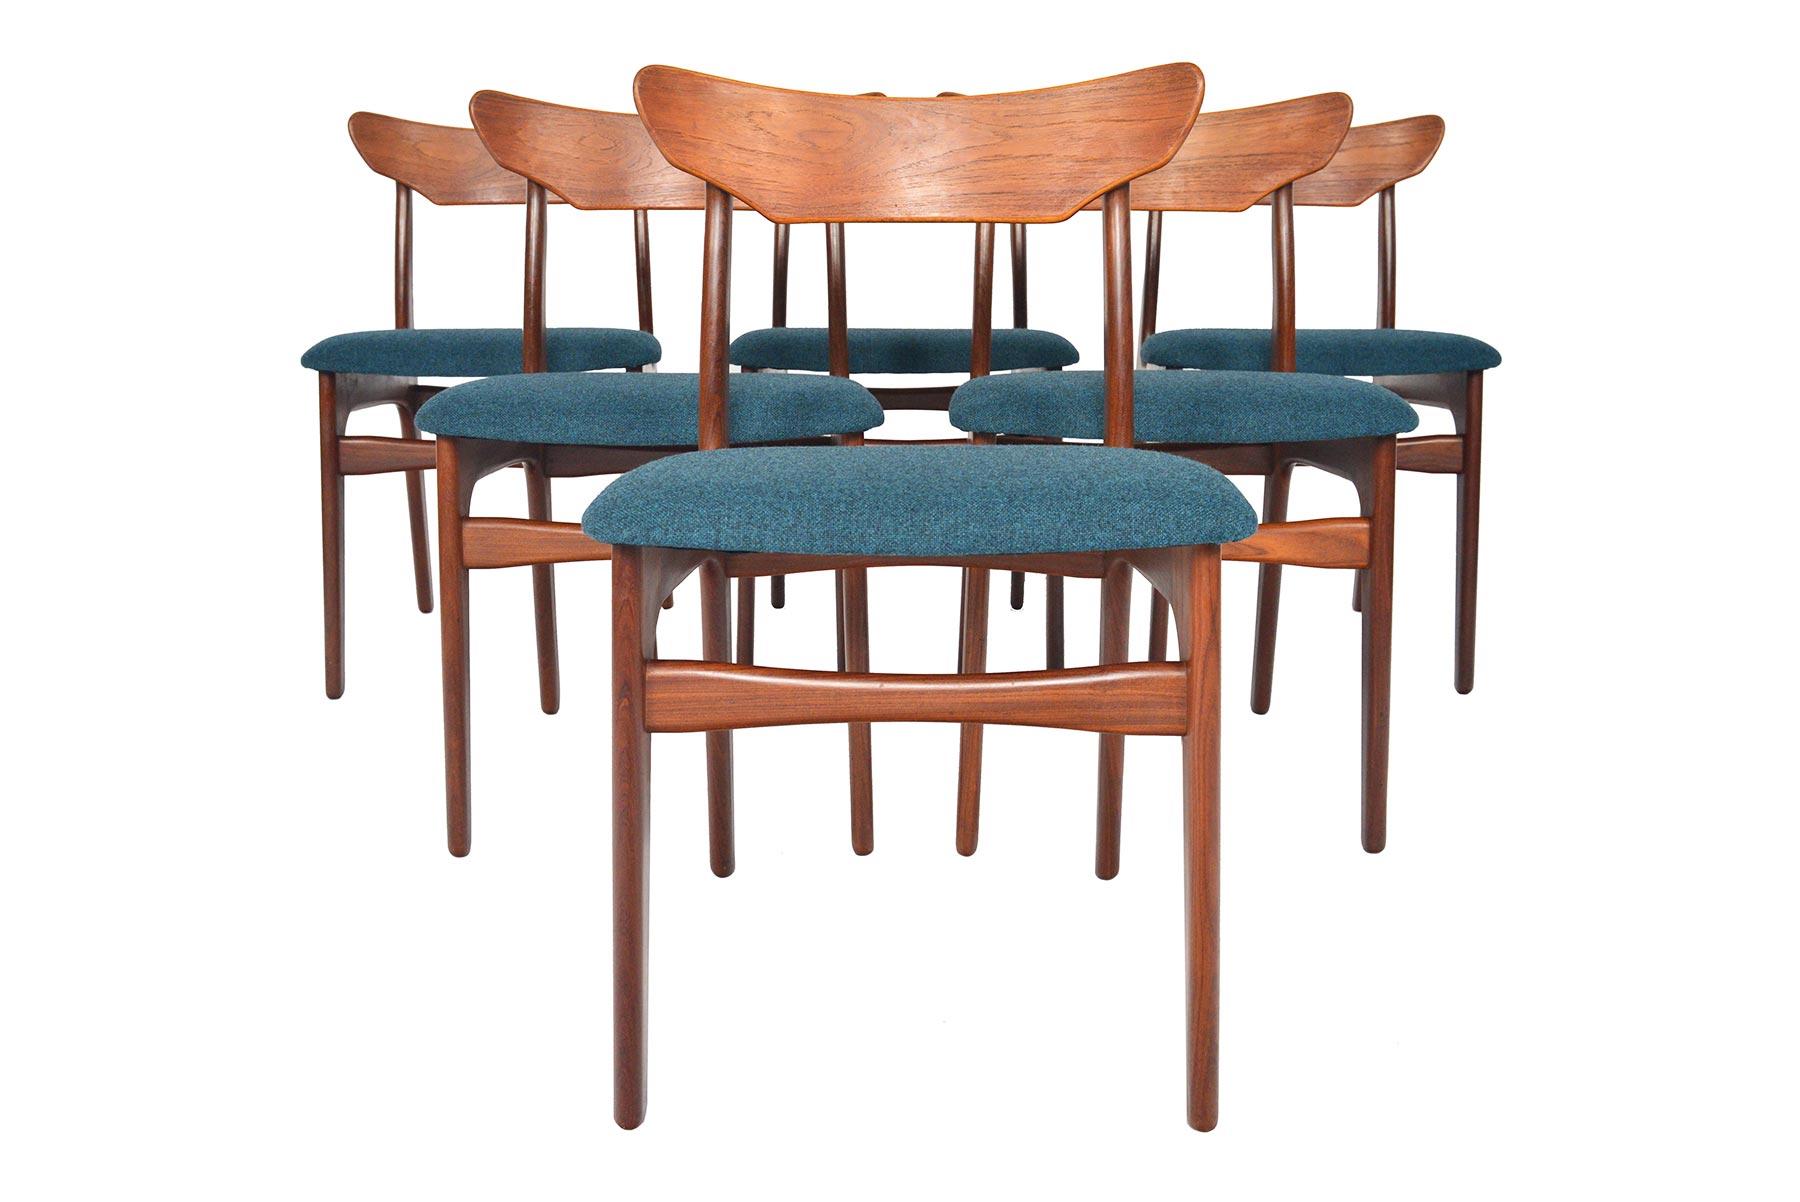 This set of six Danish modern midcentury dining chairs by Schionning & Elgaard offer a classic Scandinavian silhouette with a stately curved backrest. Crafted with teak backs and afrormosia frames, this set provides comfortable seating for both